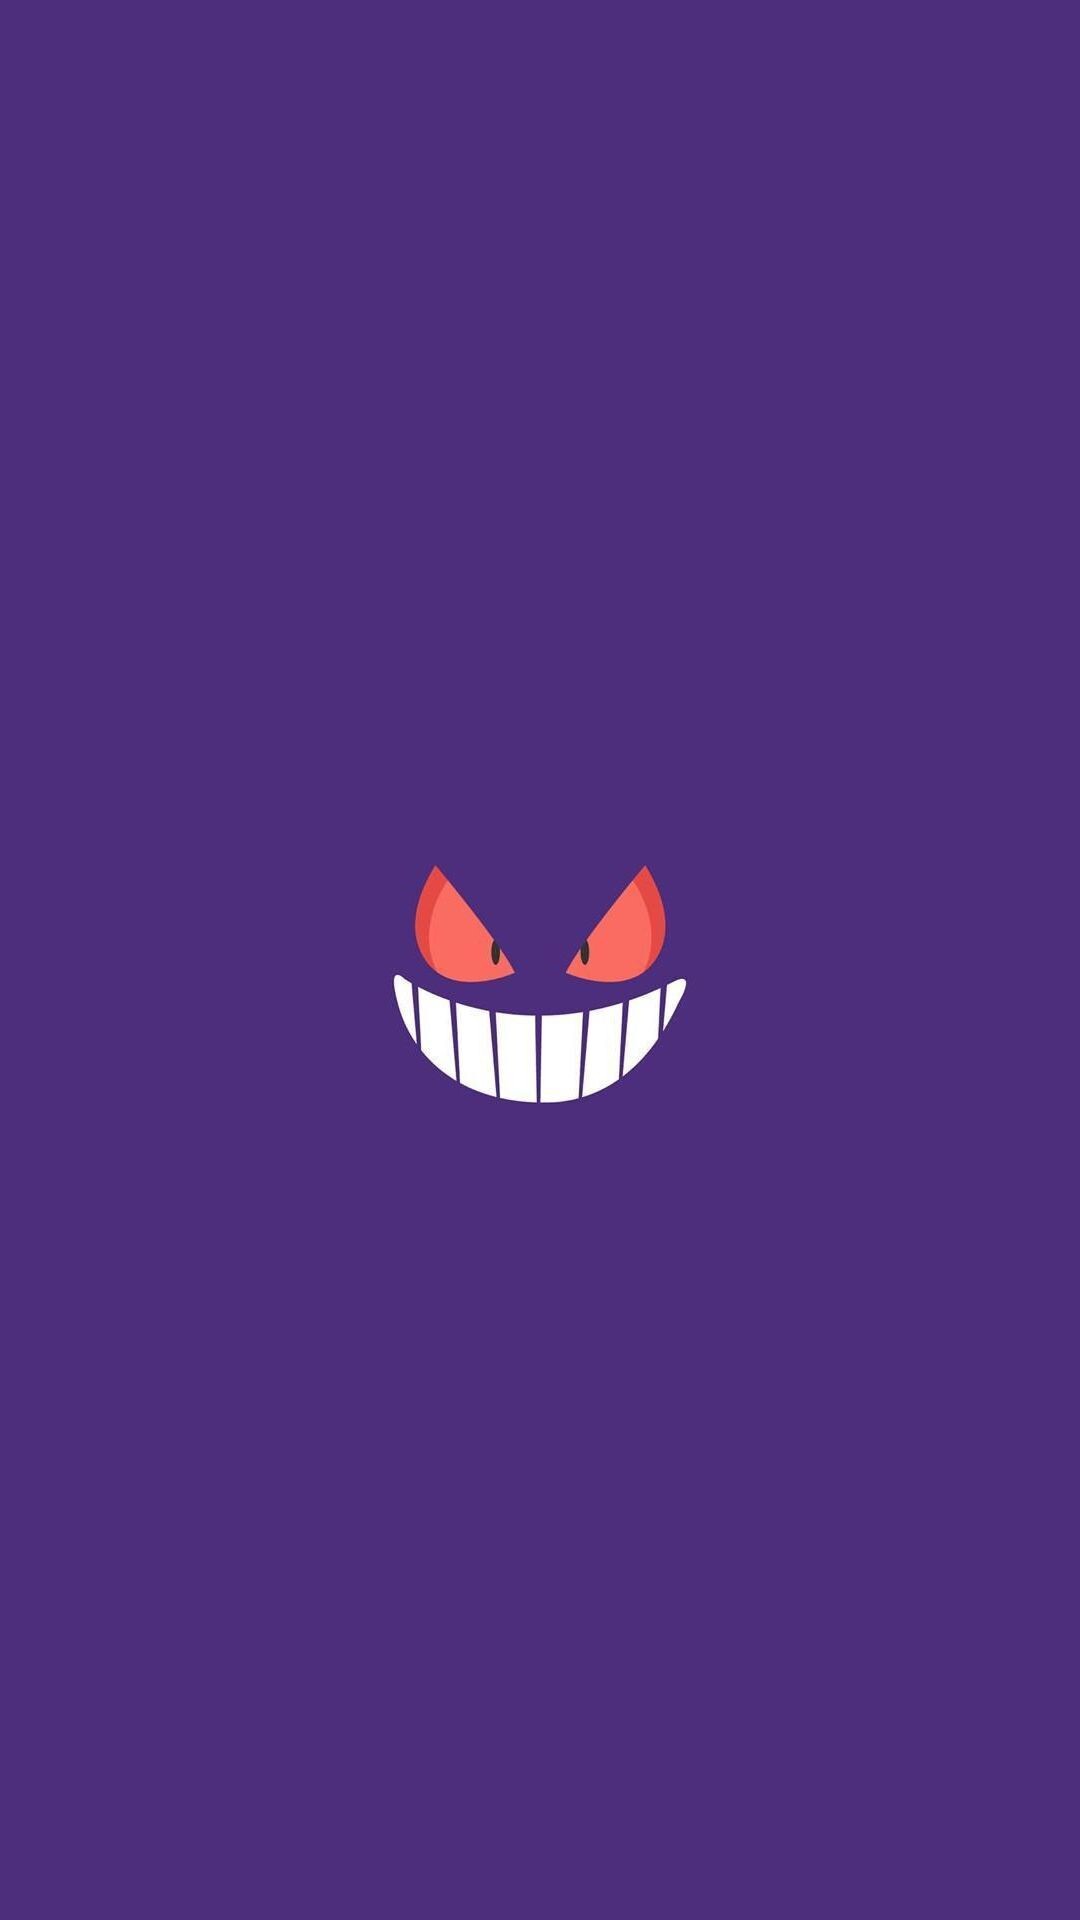 Gengar: Minimalistic, Shadow-like, Round-bodied Pokemon with two large red eyes. 1080x1920 Full HD Background.